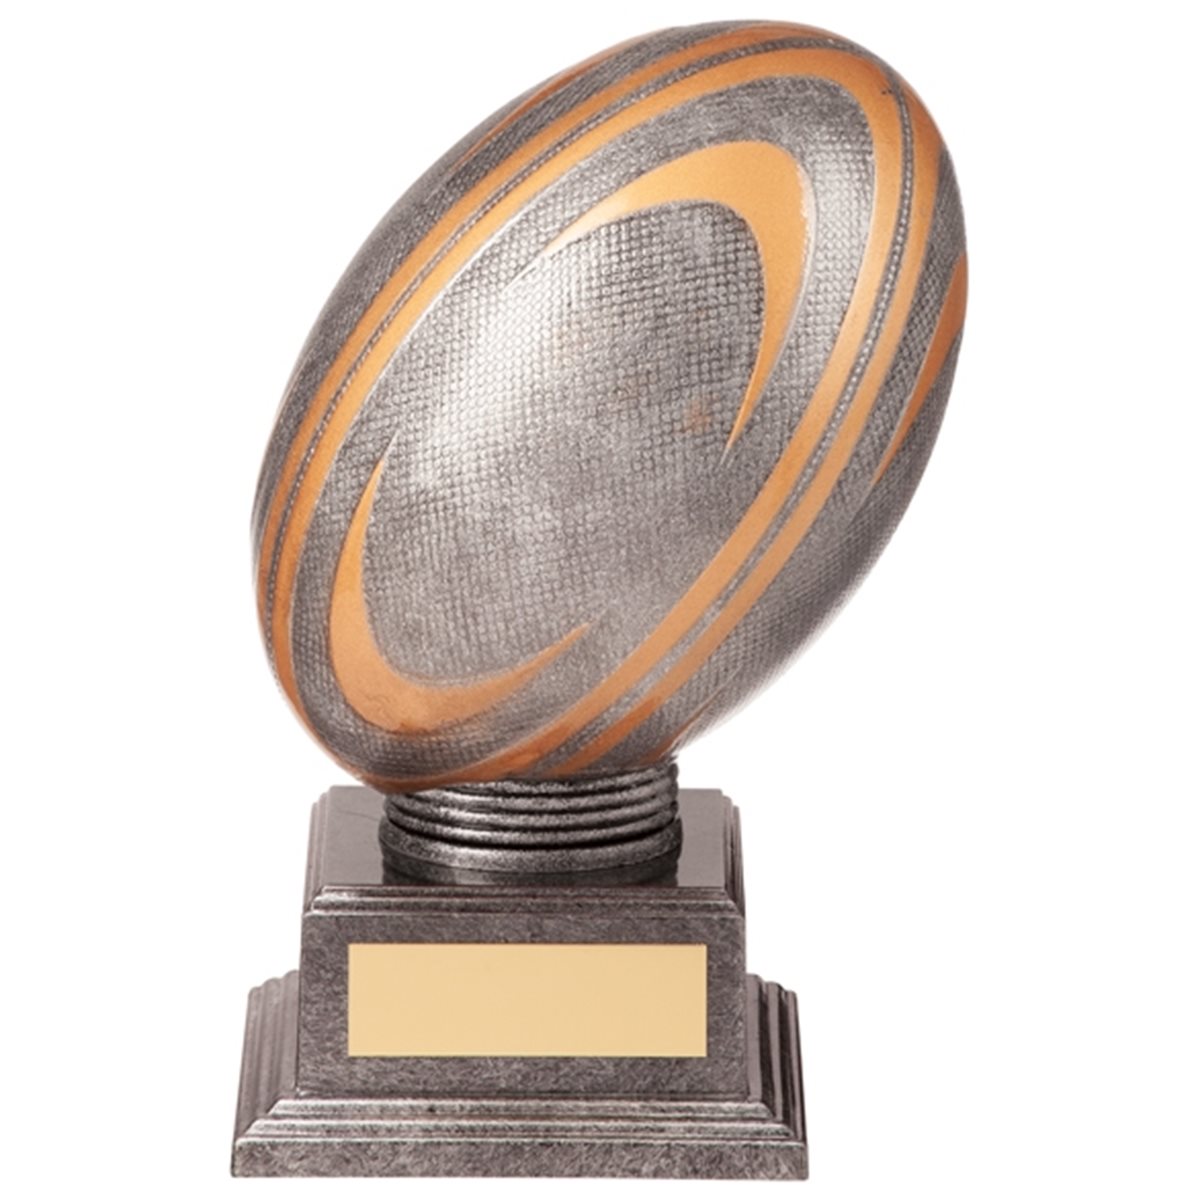 Valiant Legend Rugby Ball Trophy TH20237